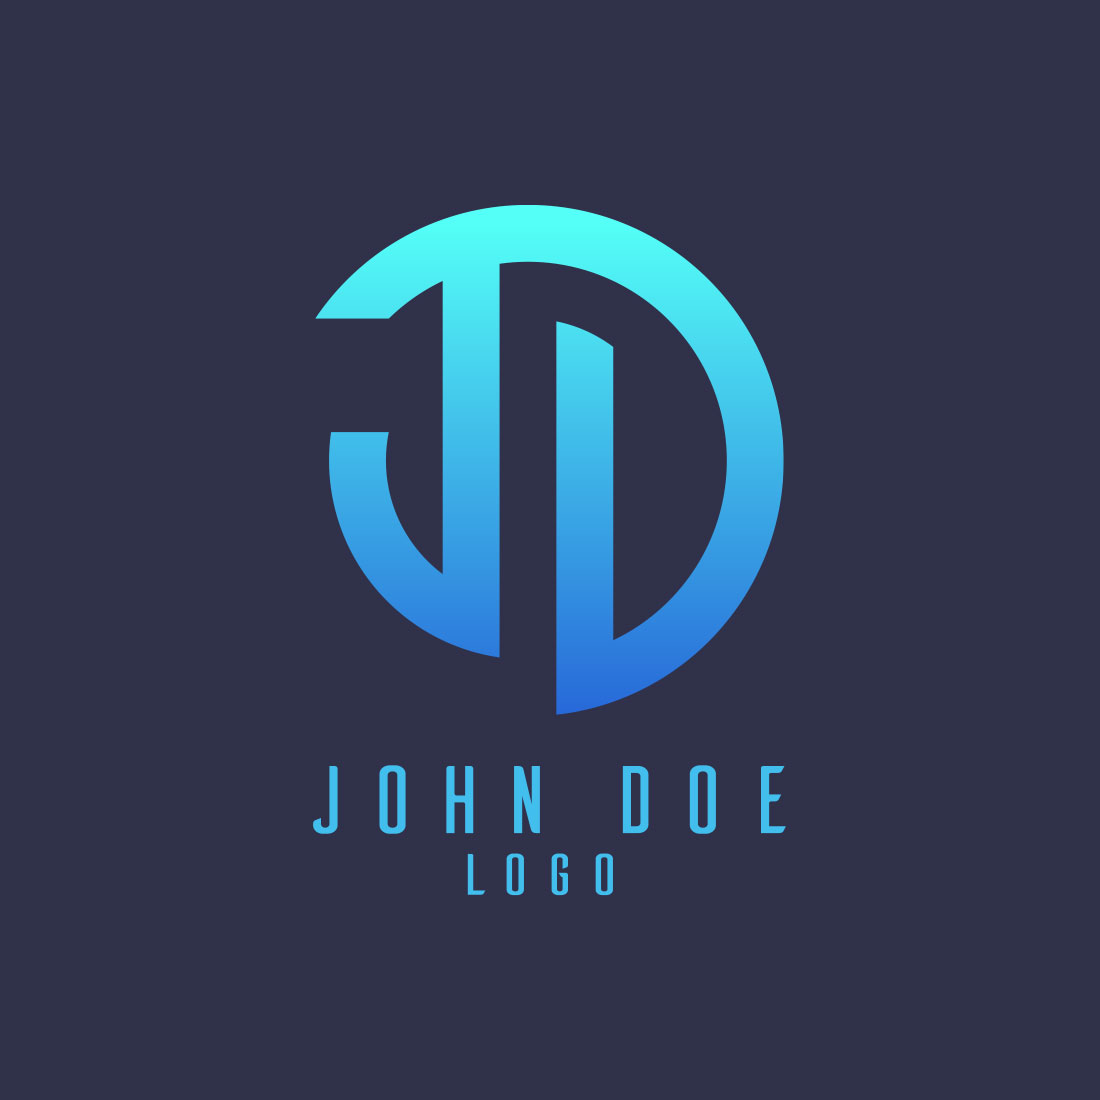 JD Alphabet Colorful Corporate Logo Template main cover.